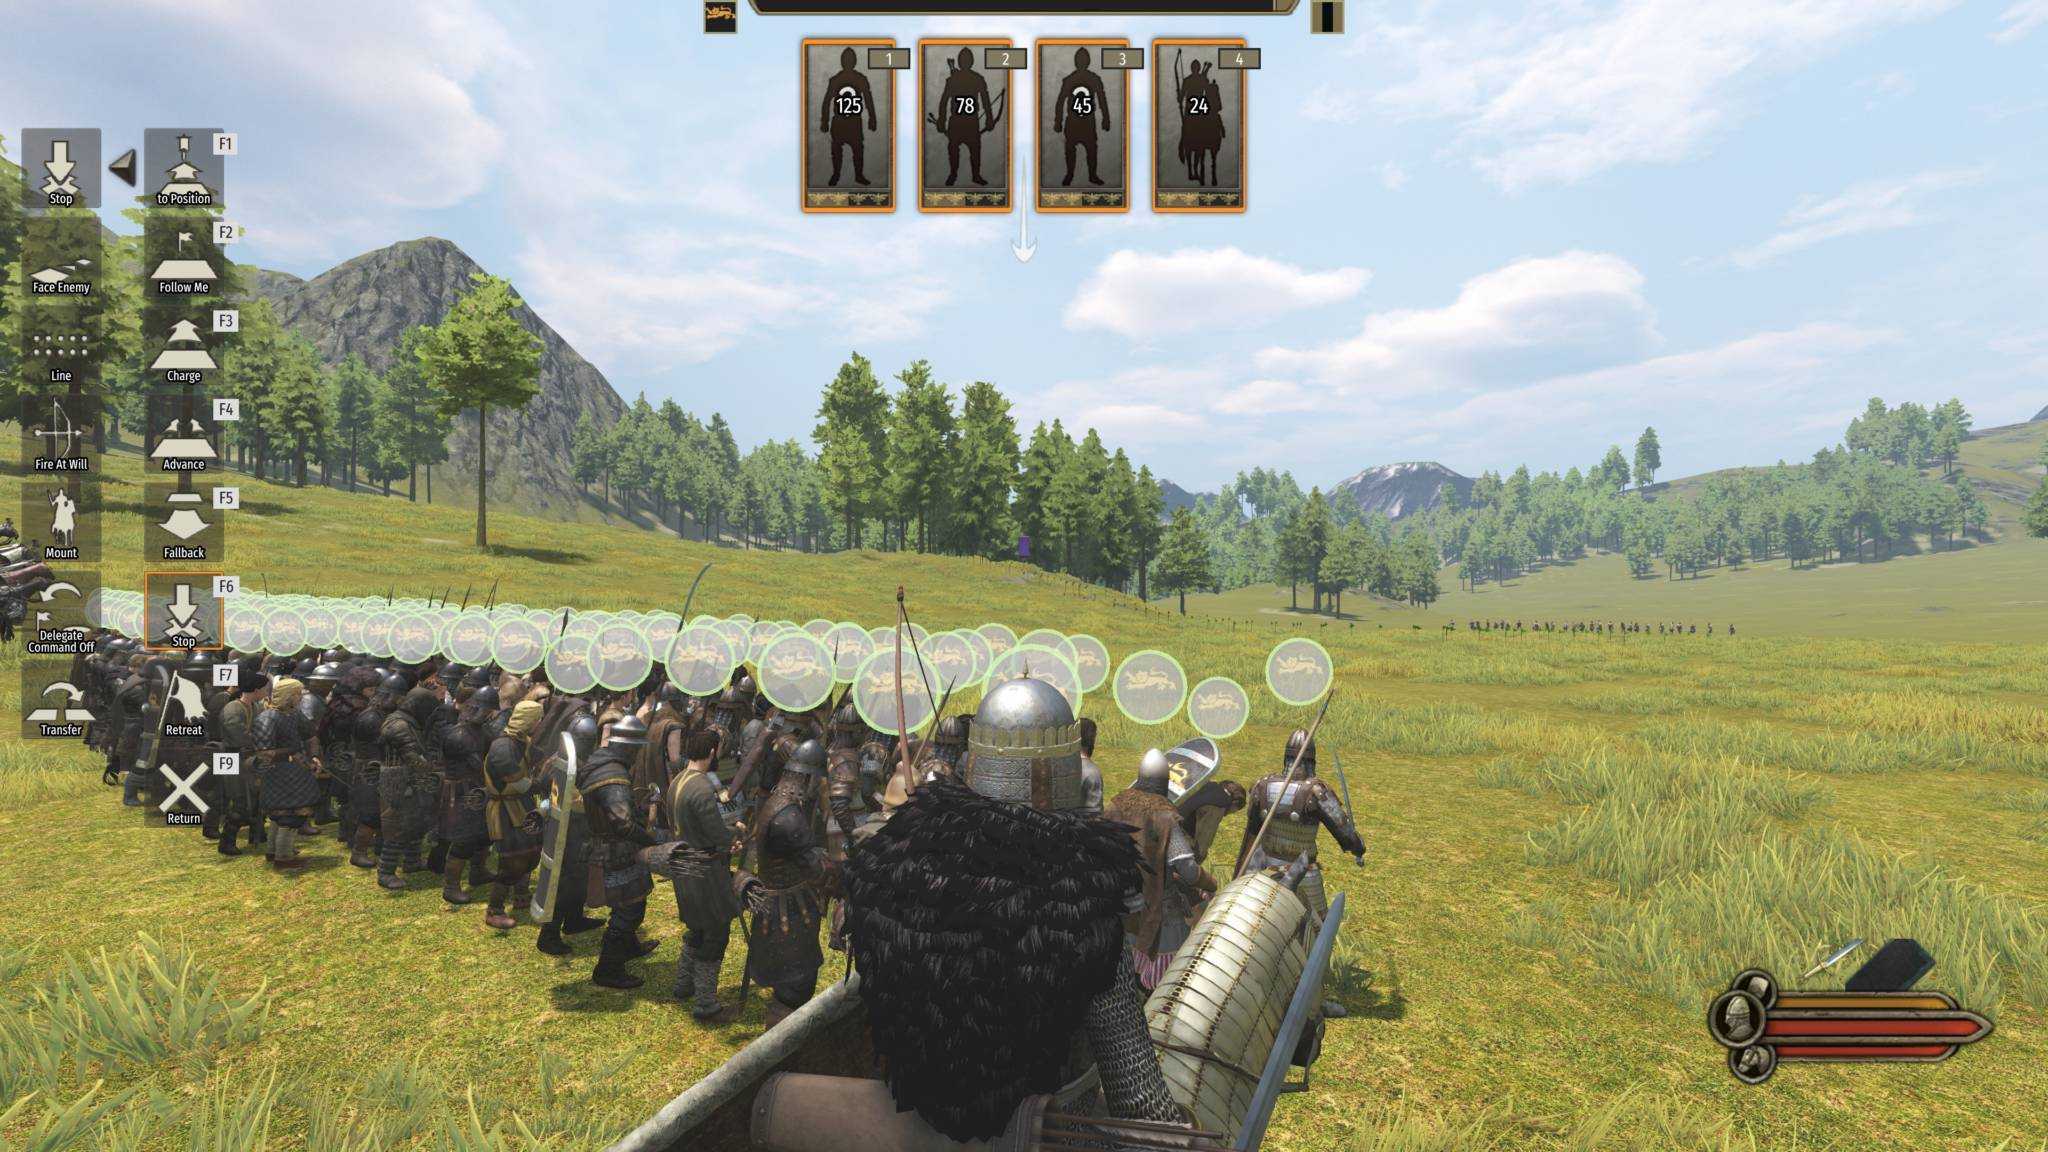 Mount and blade bannerlord караваны. Mount and Blade 2 Bannerlord. Баннерлорд 1. Mount Blade Mount Blade 2. Баннерлорд кавалерия.